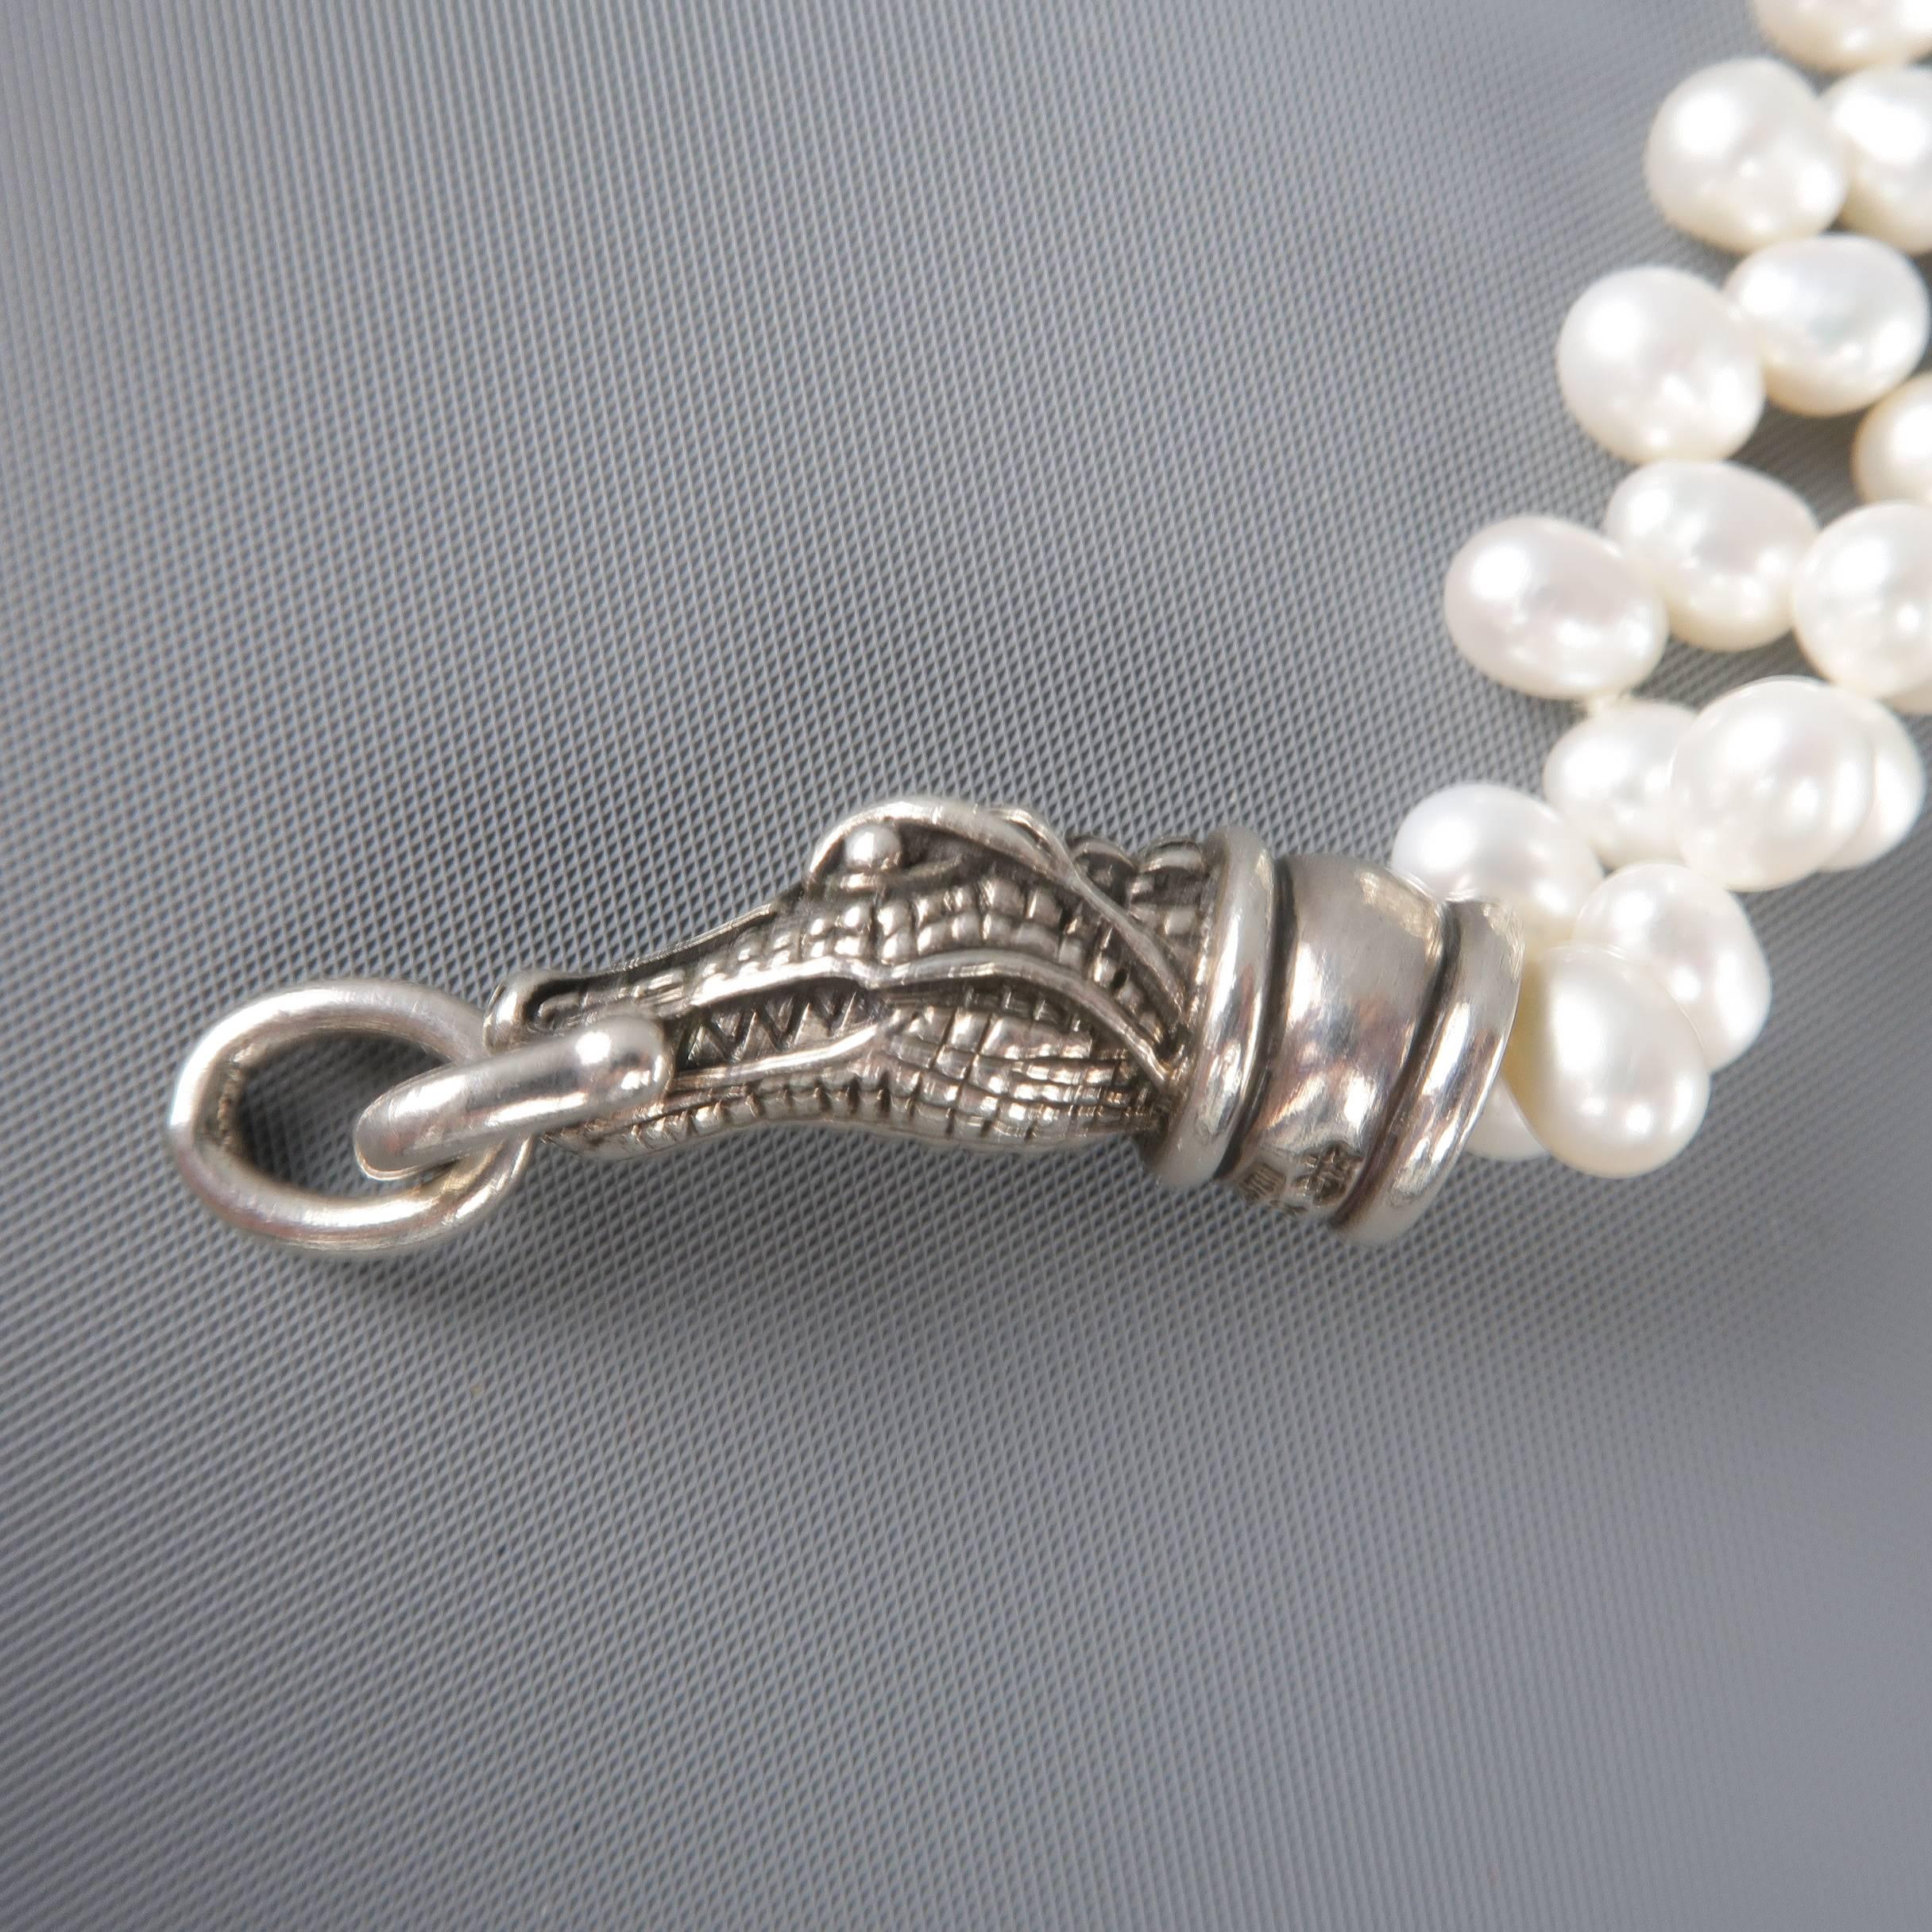 Women's Kieselstein-Cord Bracelet Off White Pearls and Sterling Silver Alligator Clasp